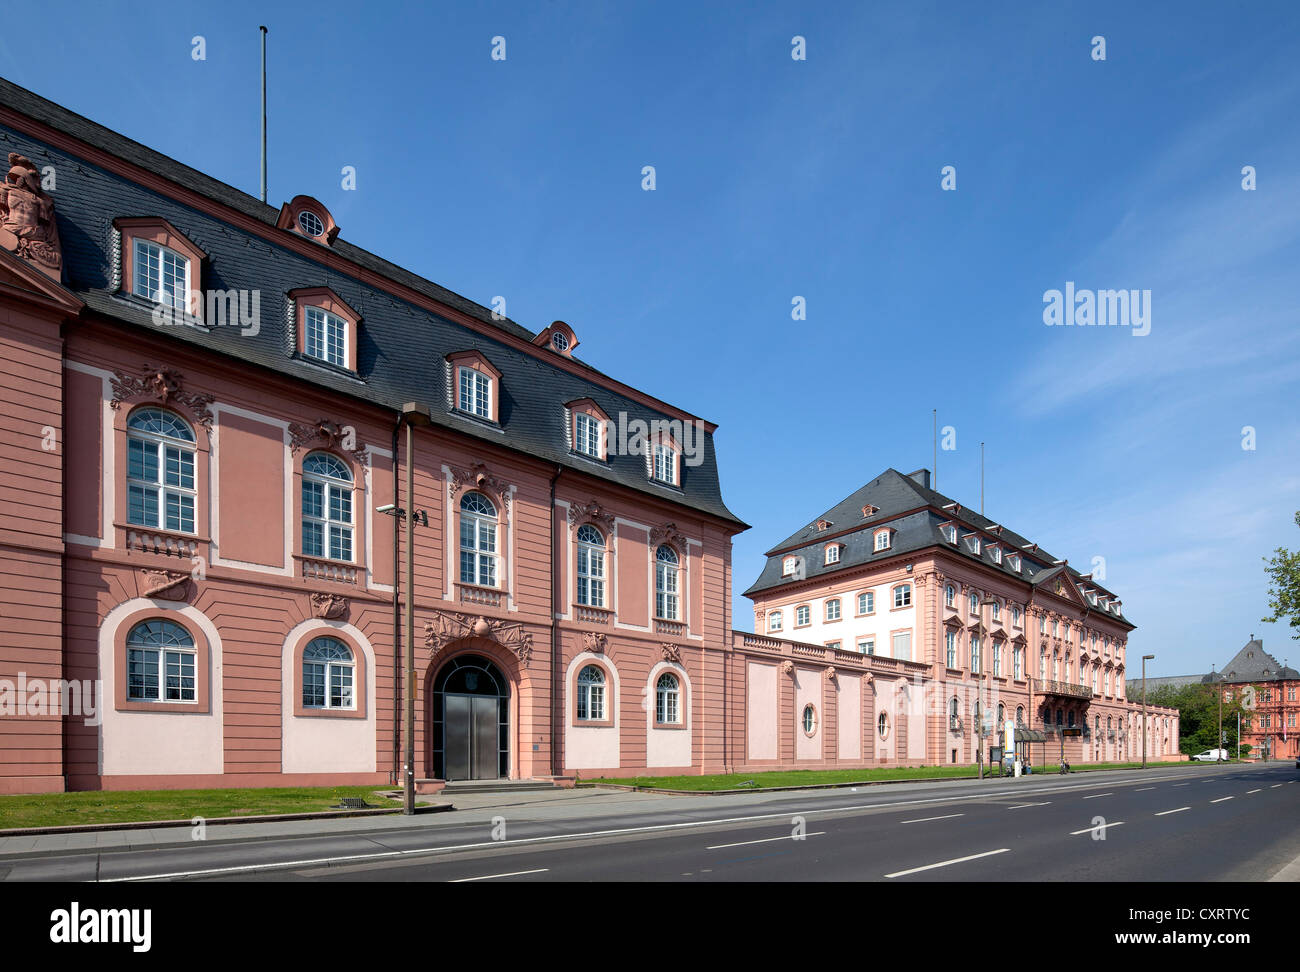 Former Deutschordenshaus or House of the Teutonic Order, plenary and administrative buildings of the Rhineland-Palatinate Stock Photo